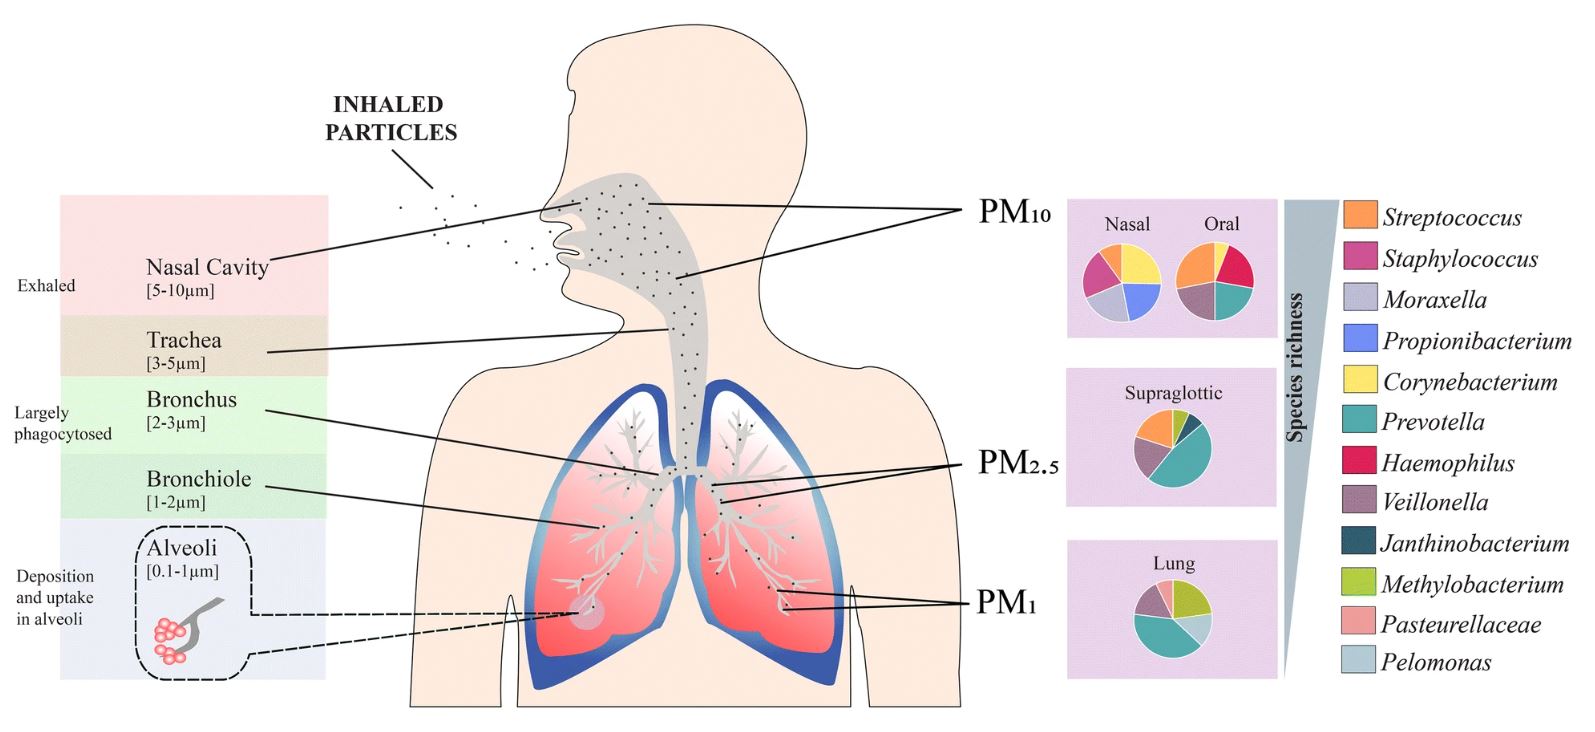 Nanoparticle inhalation into lungs